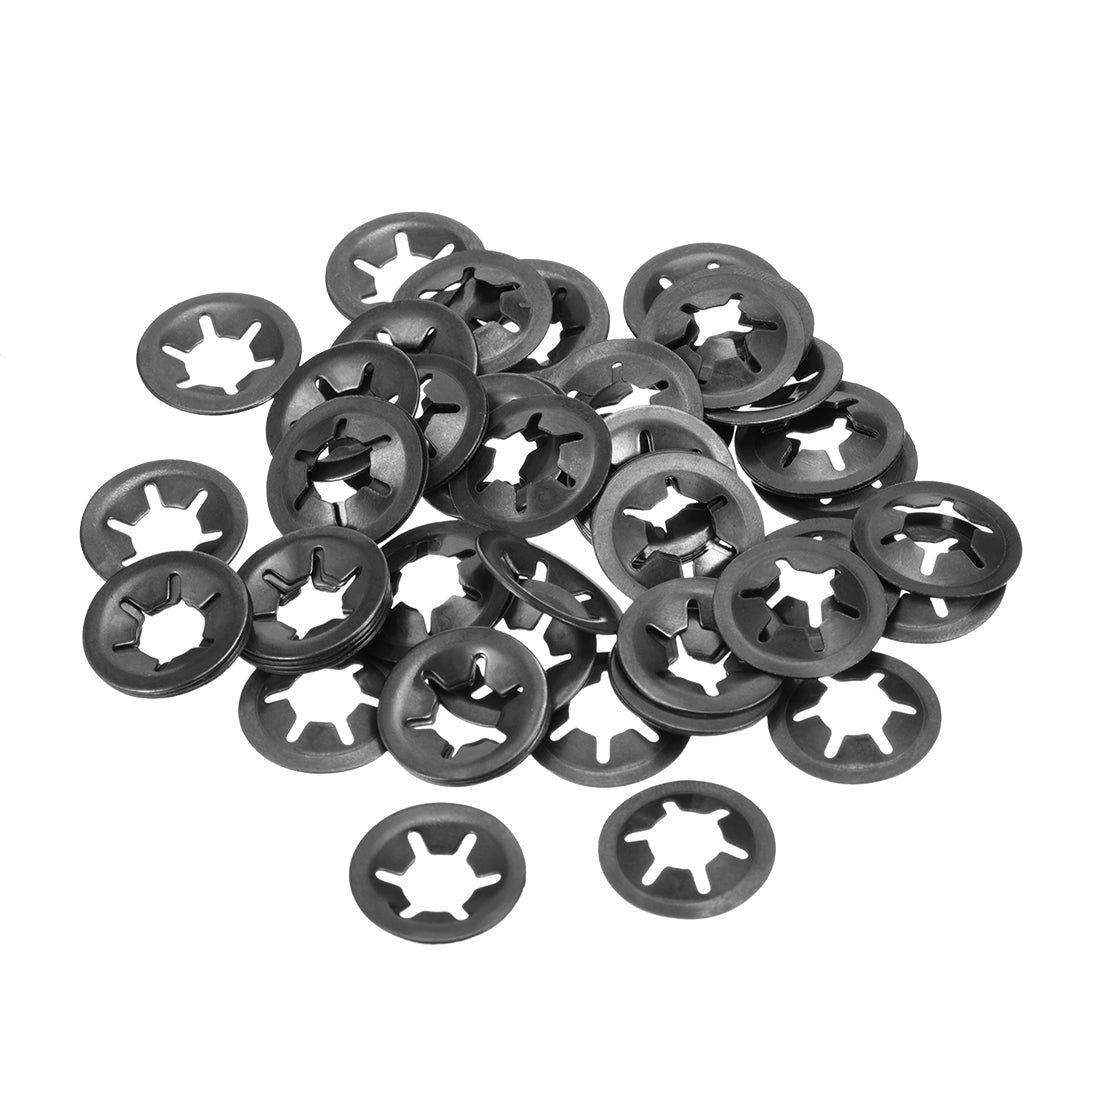 Uxcell Uxcell M10 Internal Tooth Star Locking Washer 9.2mm I.D. 20mm O.D. Lock Washers Push On Locking Speed Clip, 65Mn Black Oxide Finish 60pcs